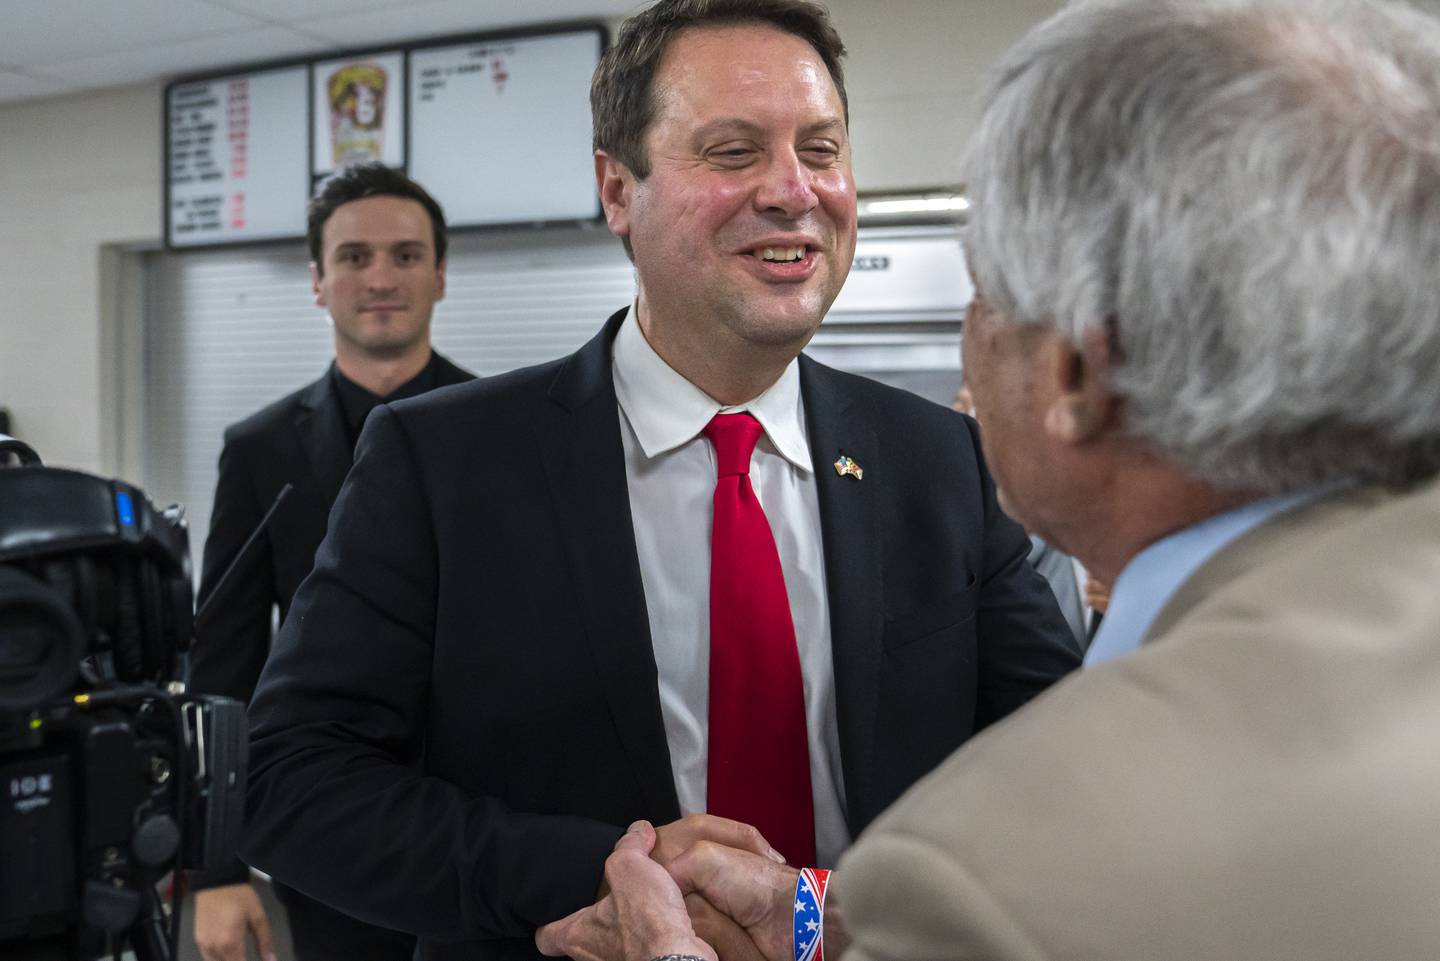 Dan Cox, a candidate for the Republican gubernatorial nomination, greets supporters during a primary election night event on July 19, 2022 in Emmitsburg, Maryland. Voters will choose candidates during the primary for governor and seats in the House of Representatives in the upcoming November election.